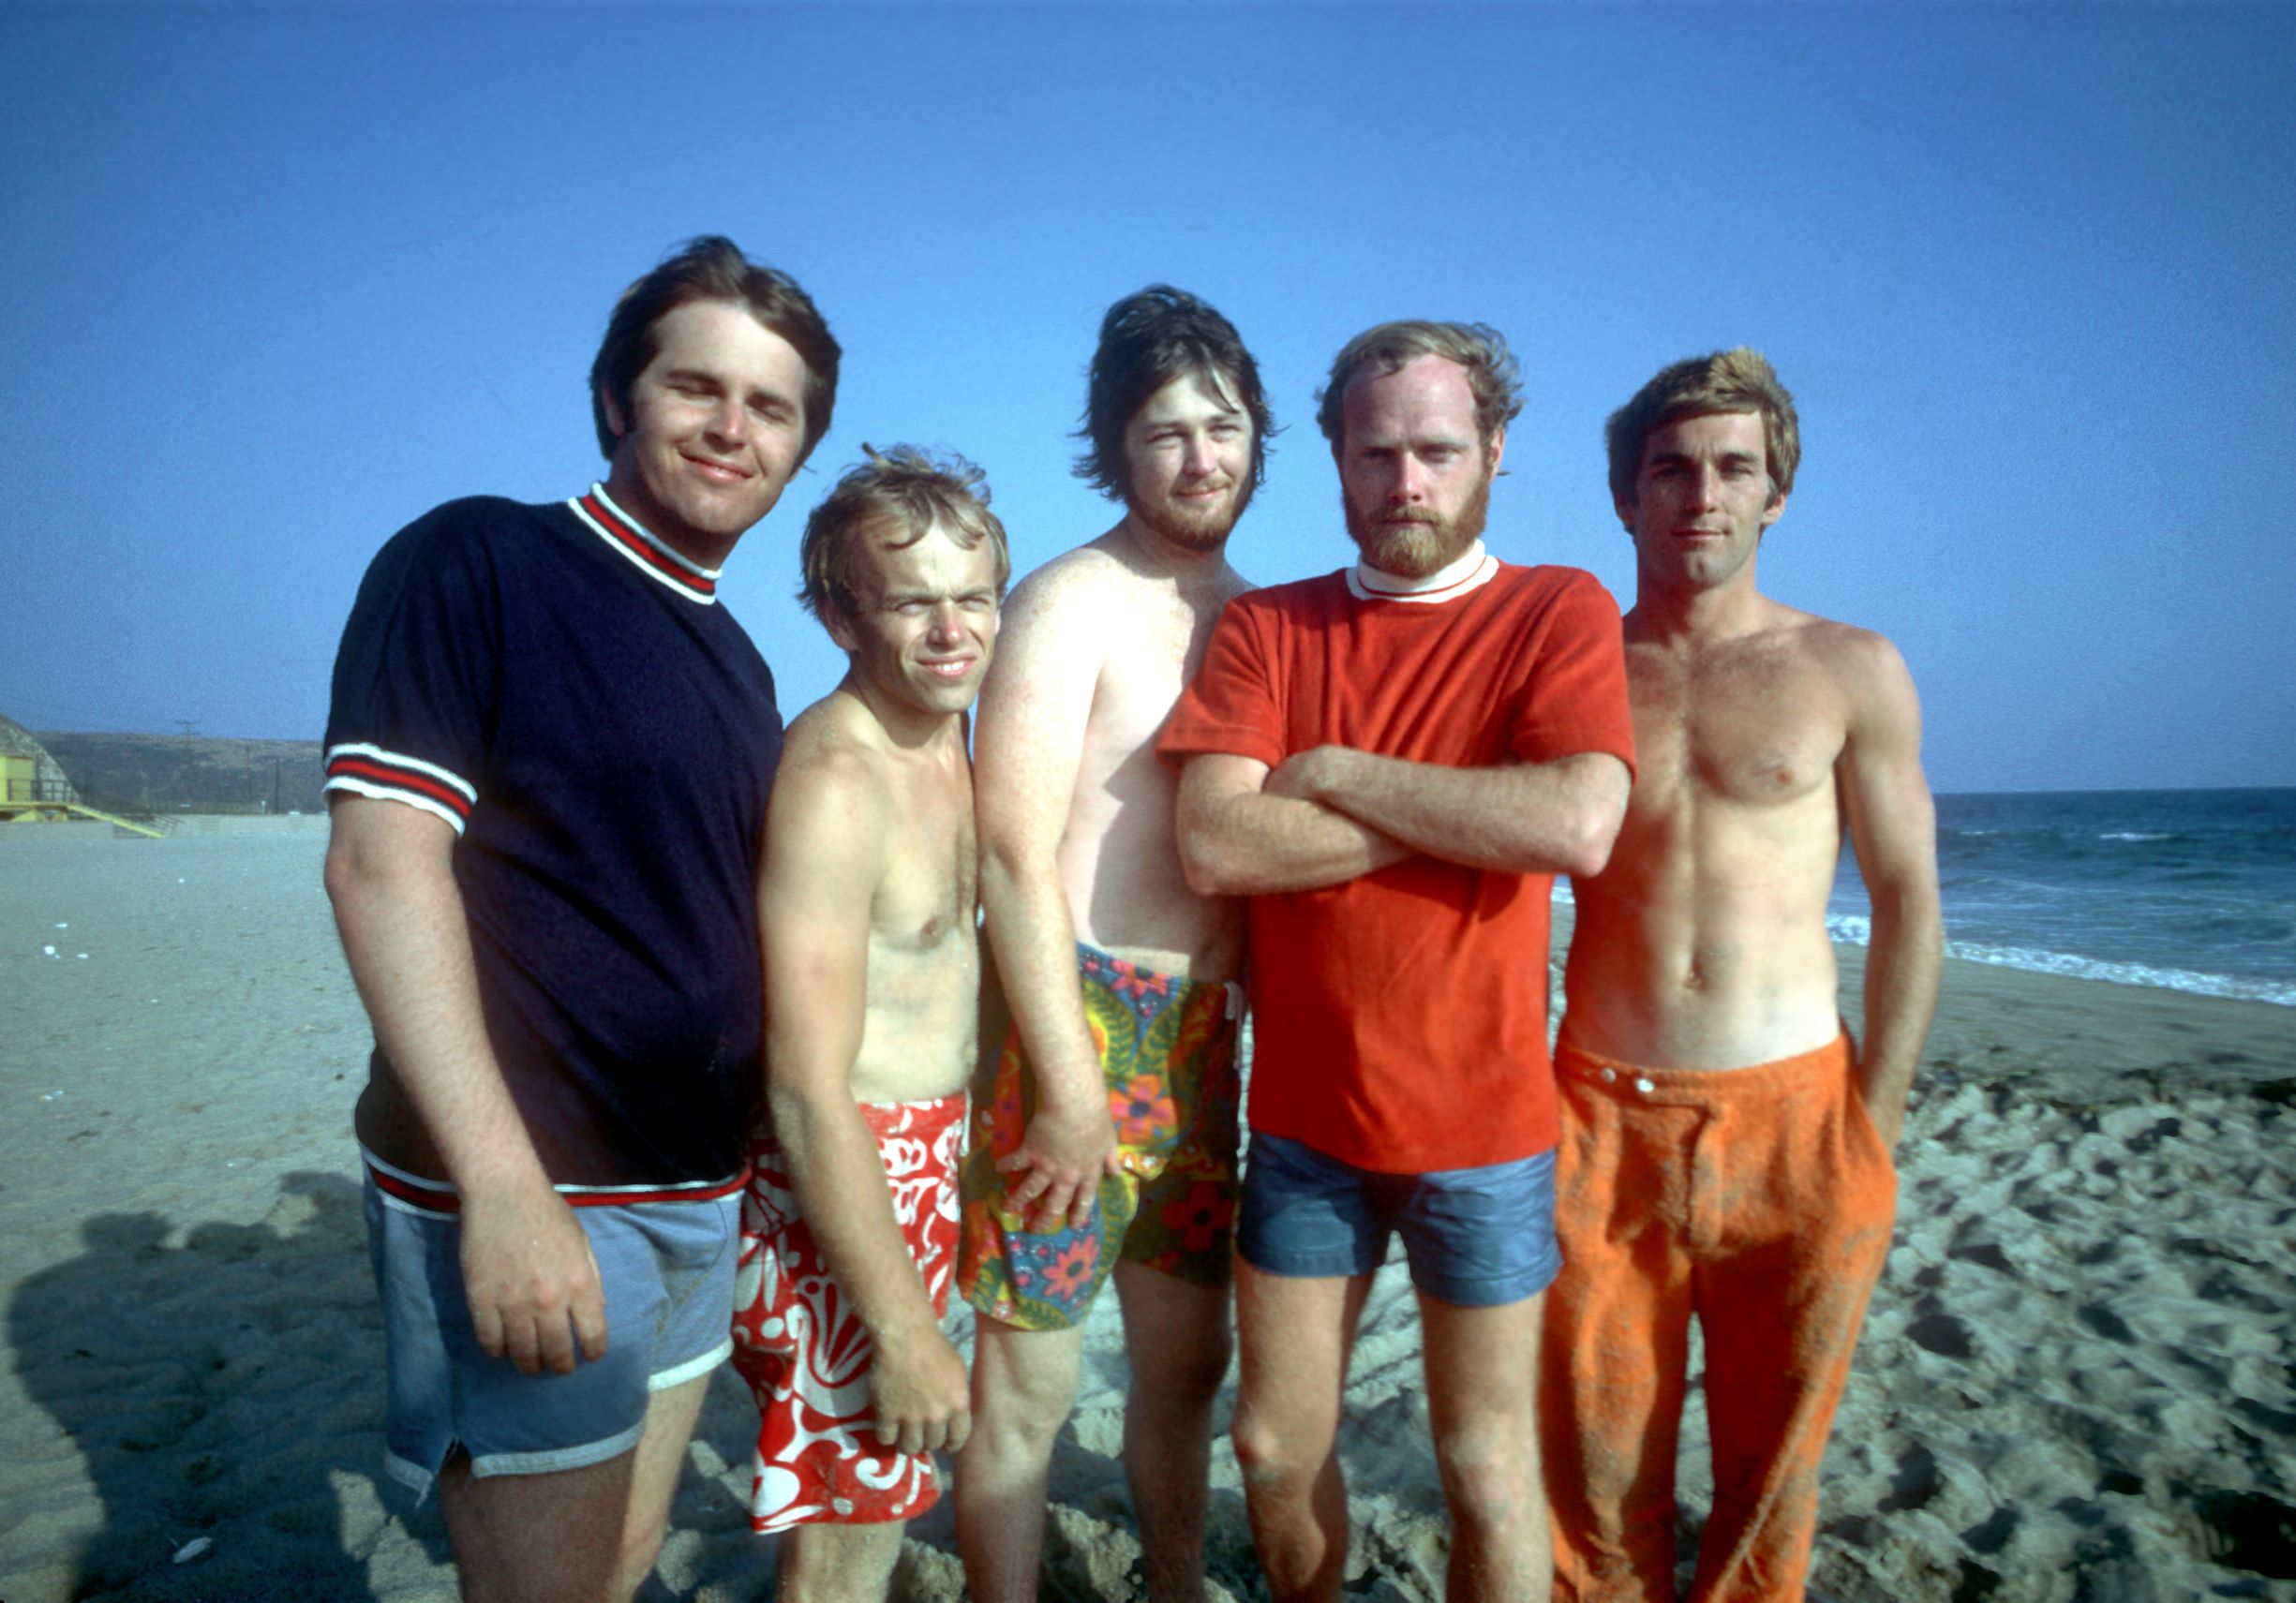 The Beach Boys by the water